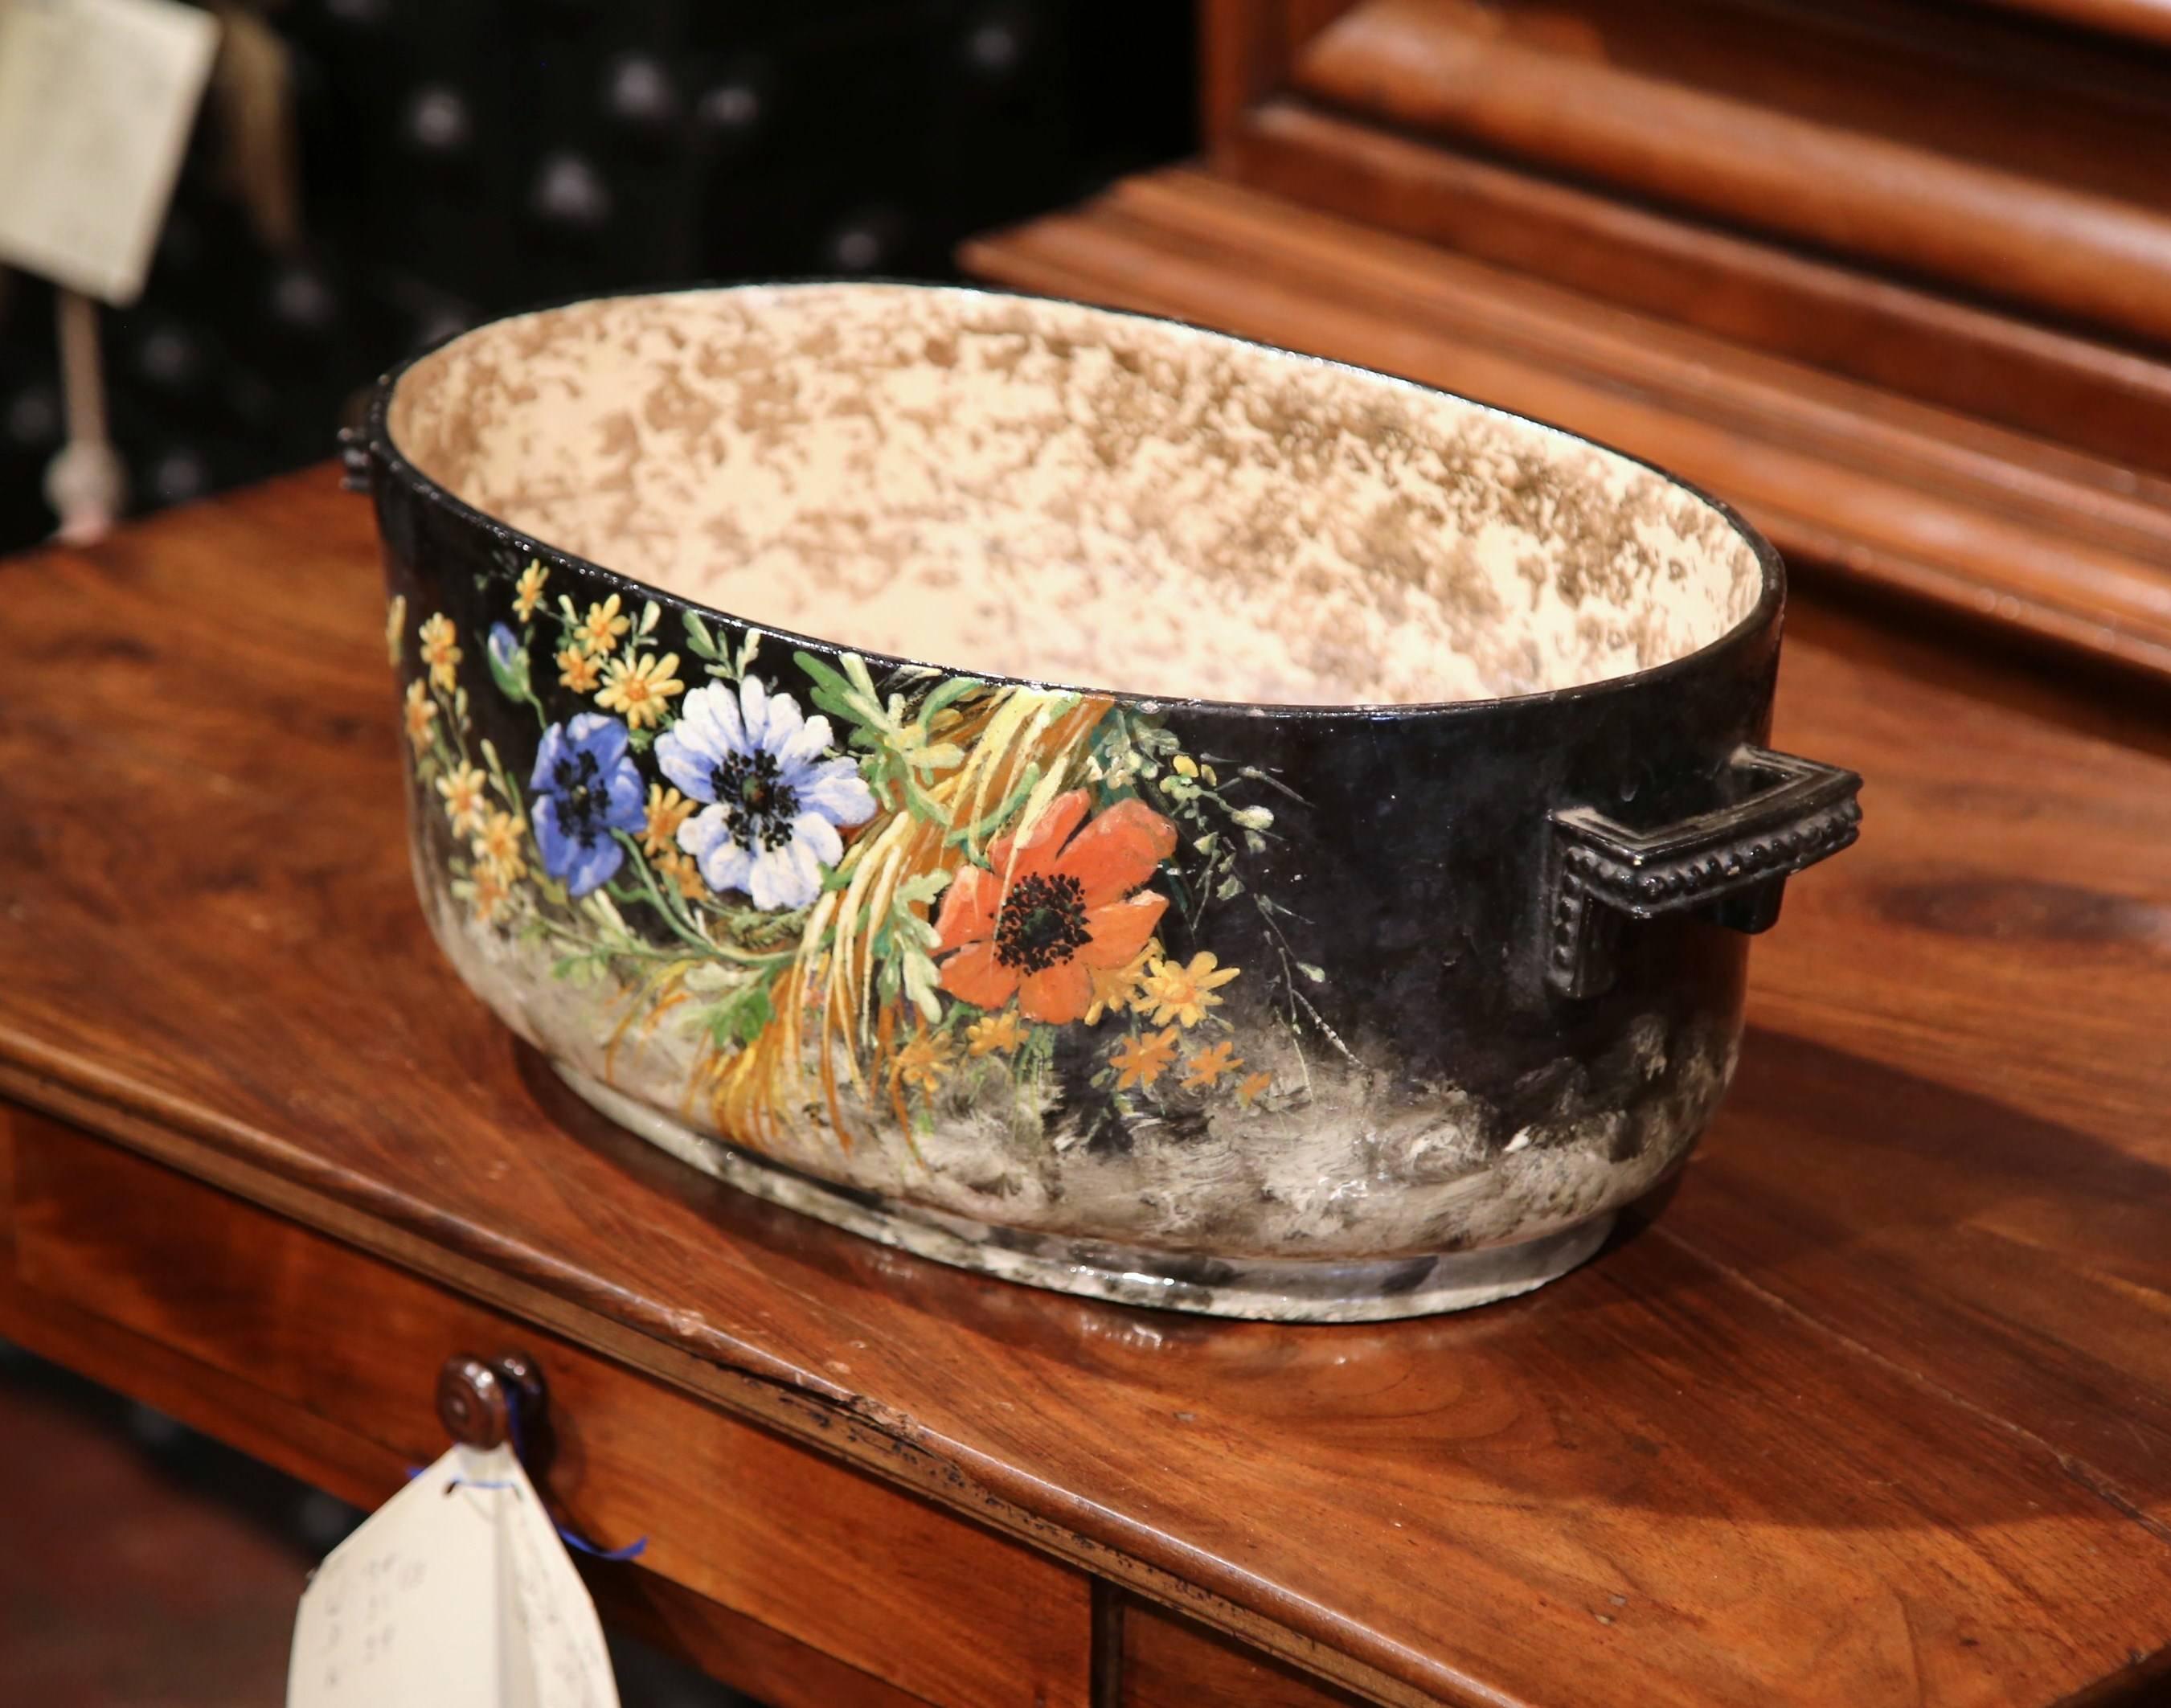 This elegant and colorful planter was hand-painted in Central France, more specifically Montigny-sur-Loing, circa 1920. The antique jardinière has small handles on both ends and features colorful hand painted flowers on both sides. The jardinière is